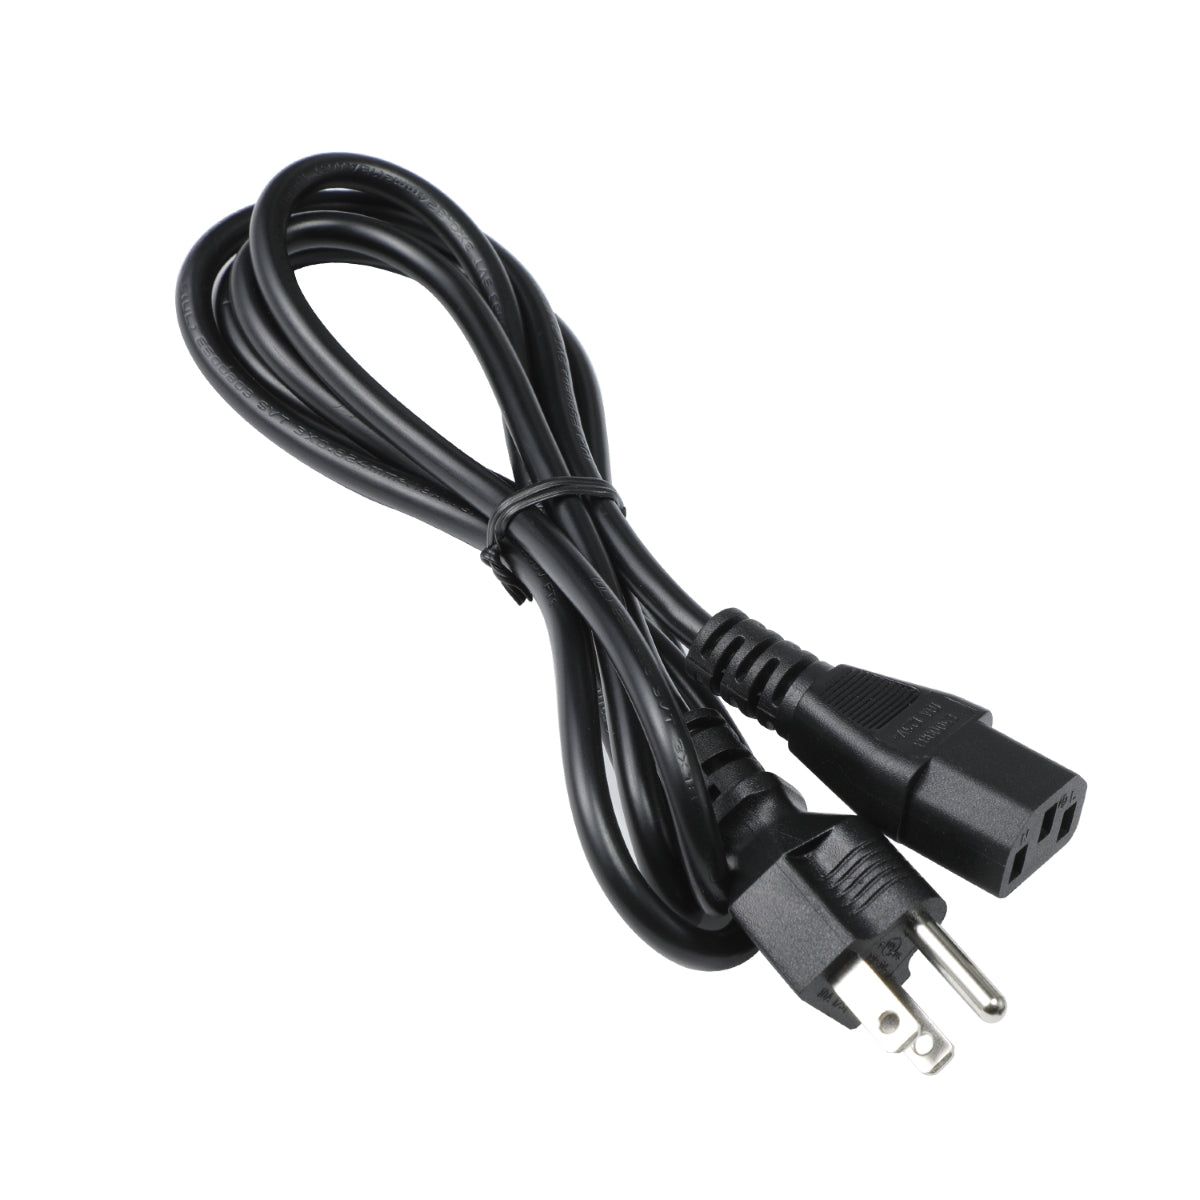 Power Cord for Dell UP3216Q Monitor